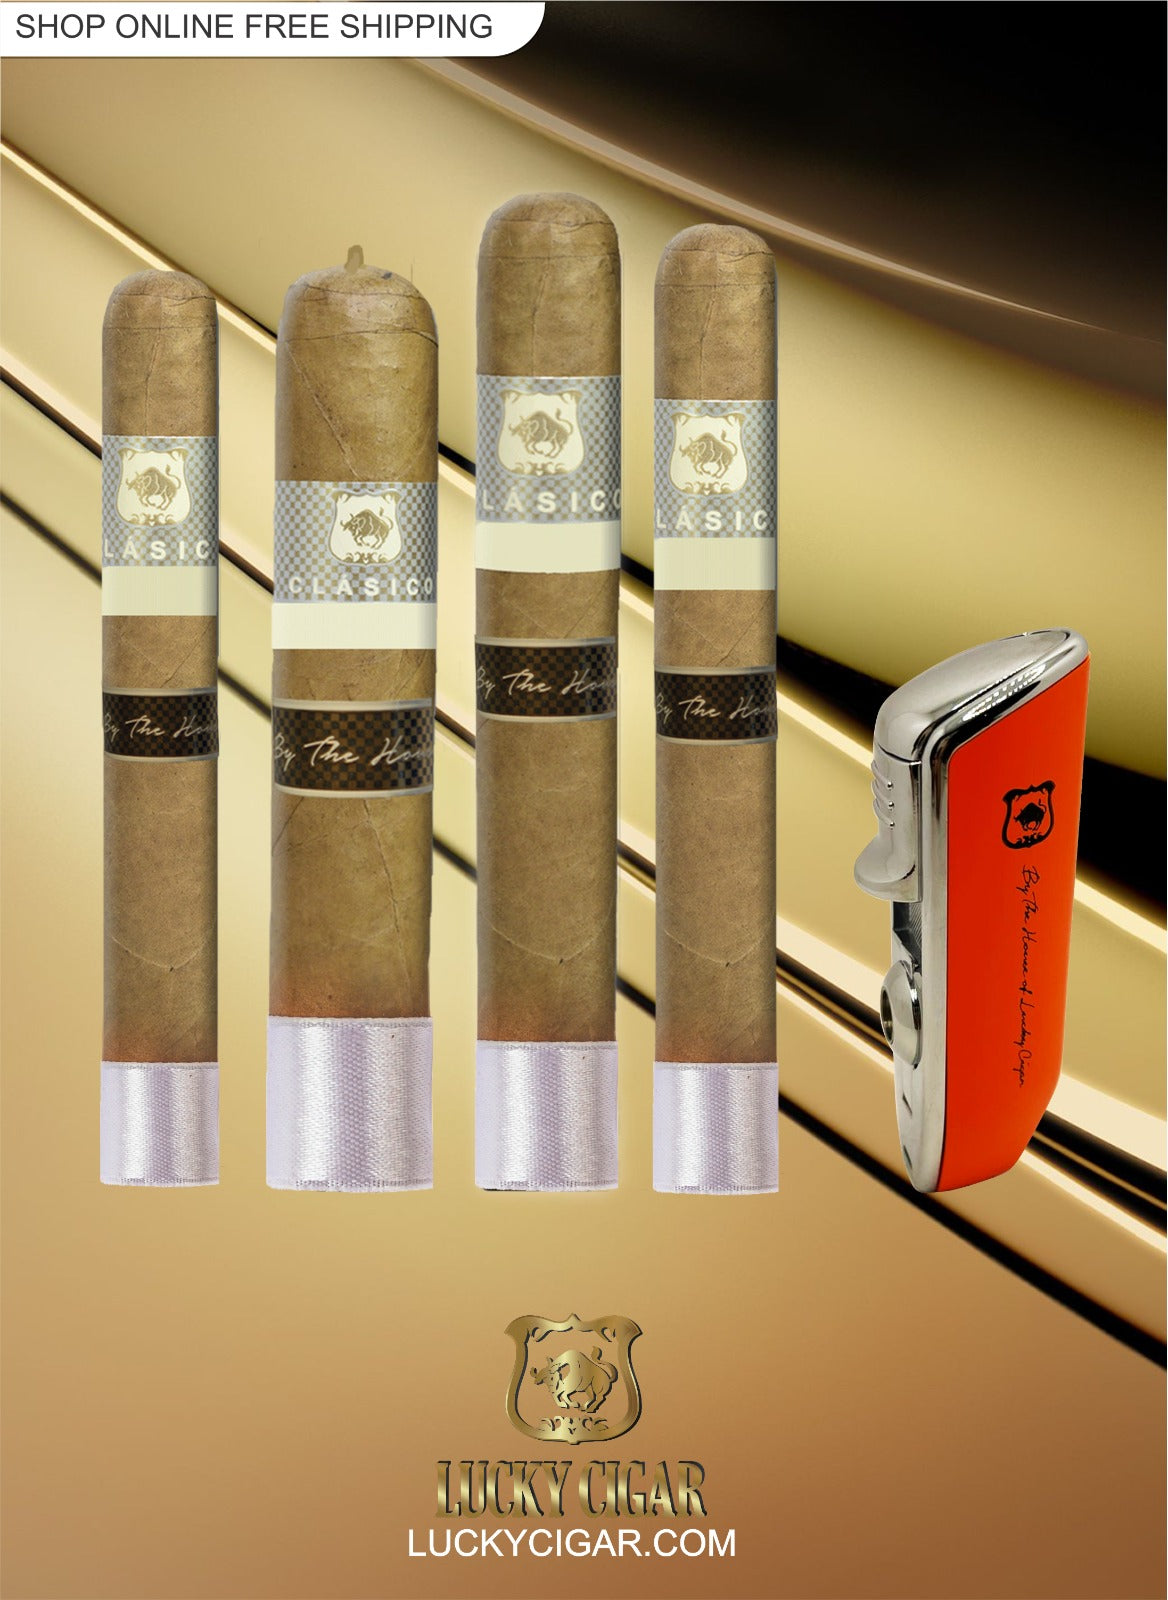 Classic Cigars - Classico by Lucky Cigar: Set of 4 Cigars, Robusto, Rotchilde, Toro, Gordo with Torch